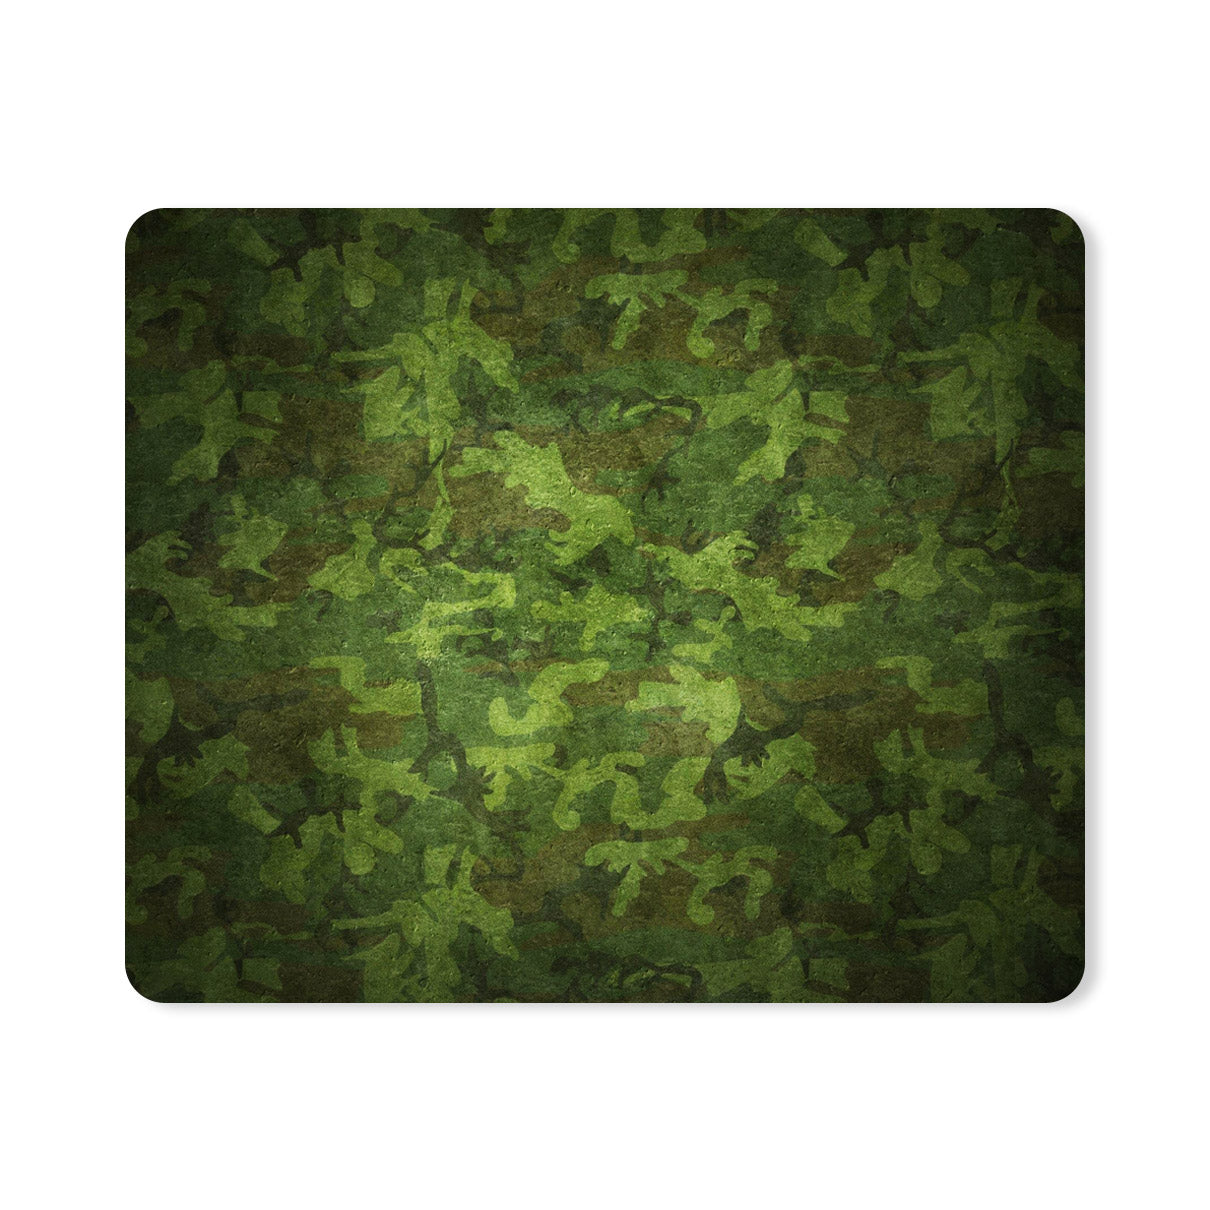 Camouflage Army Dark Green Designer Printed Premium Mouse pad (9 in x 7.5 in)